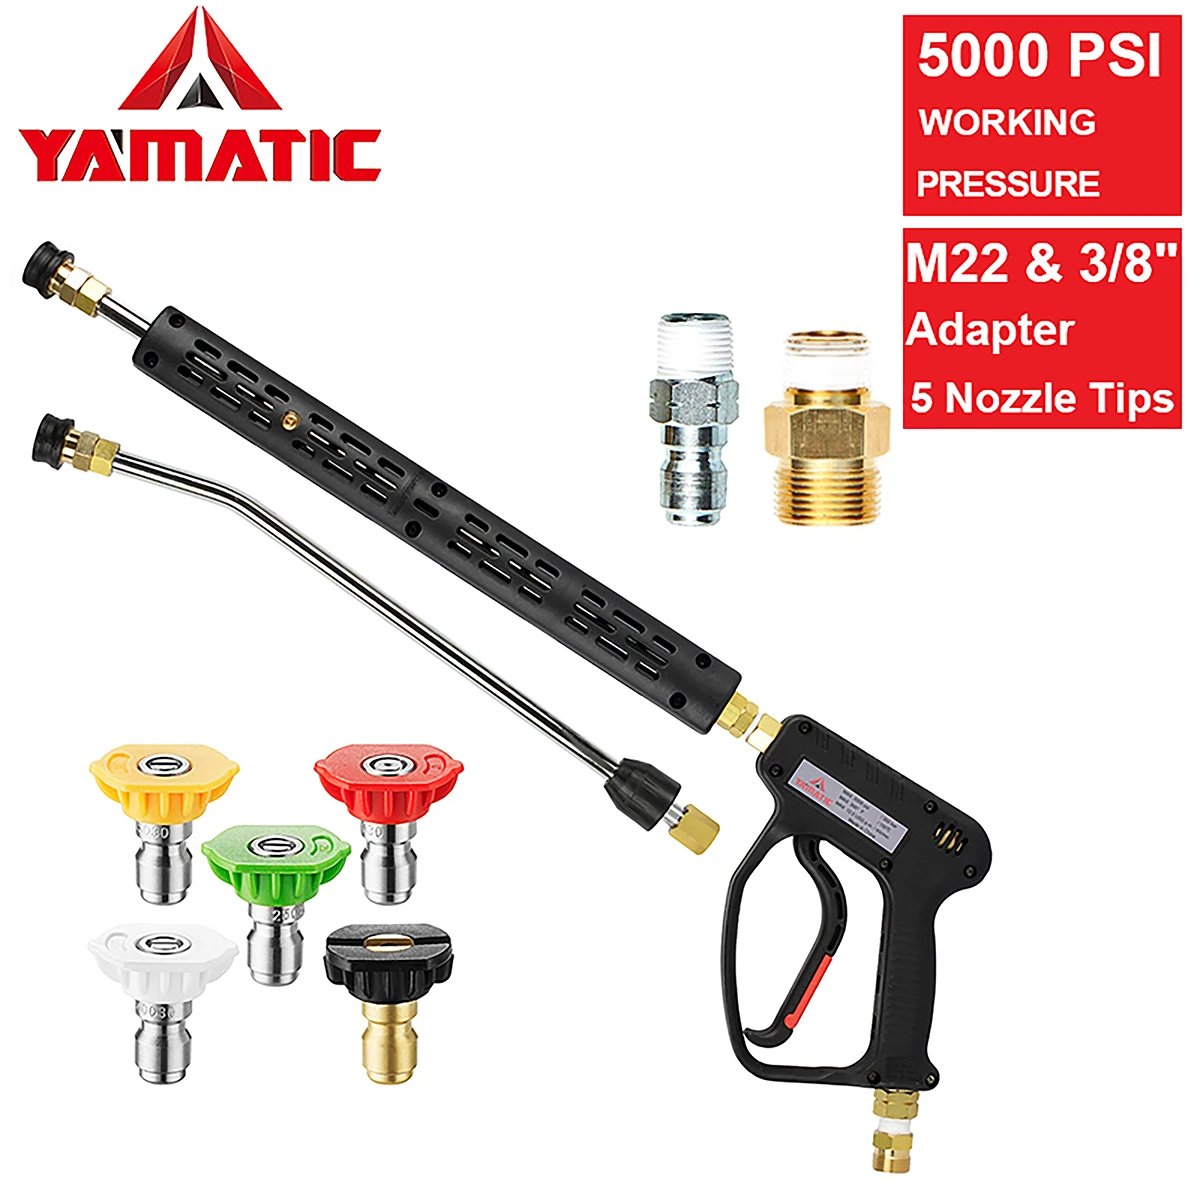 

High Pressure Spray Water For Gun Car Cleaning Wash Tool Kits Washing Garden Watering Hose Nozzle Sprinkler Auto Washer Guns